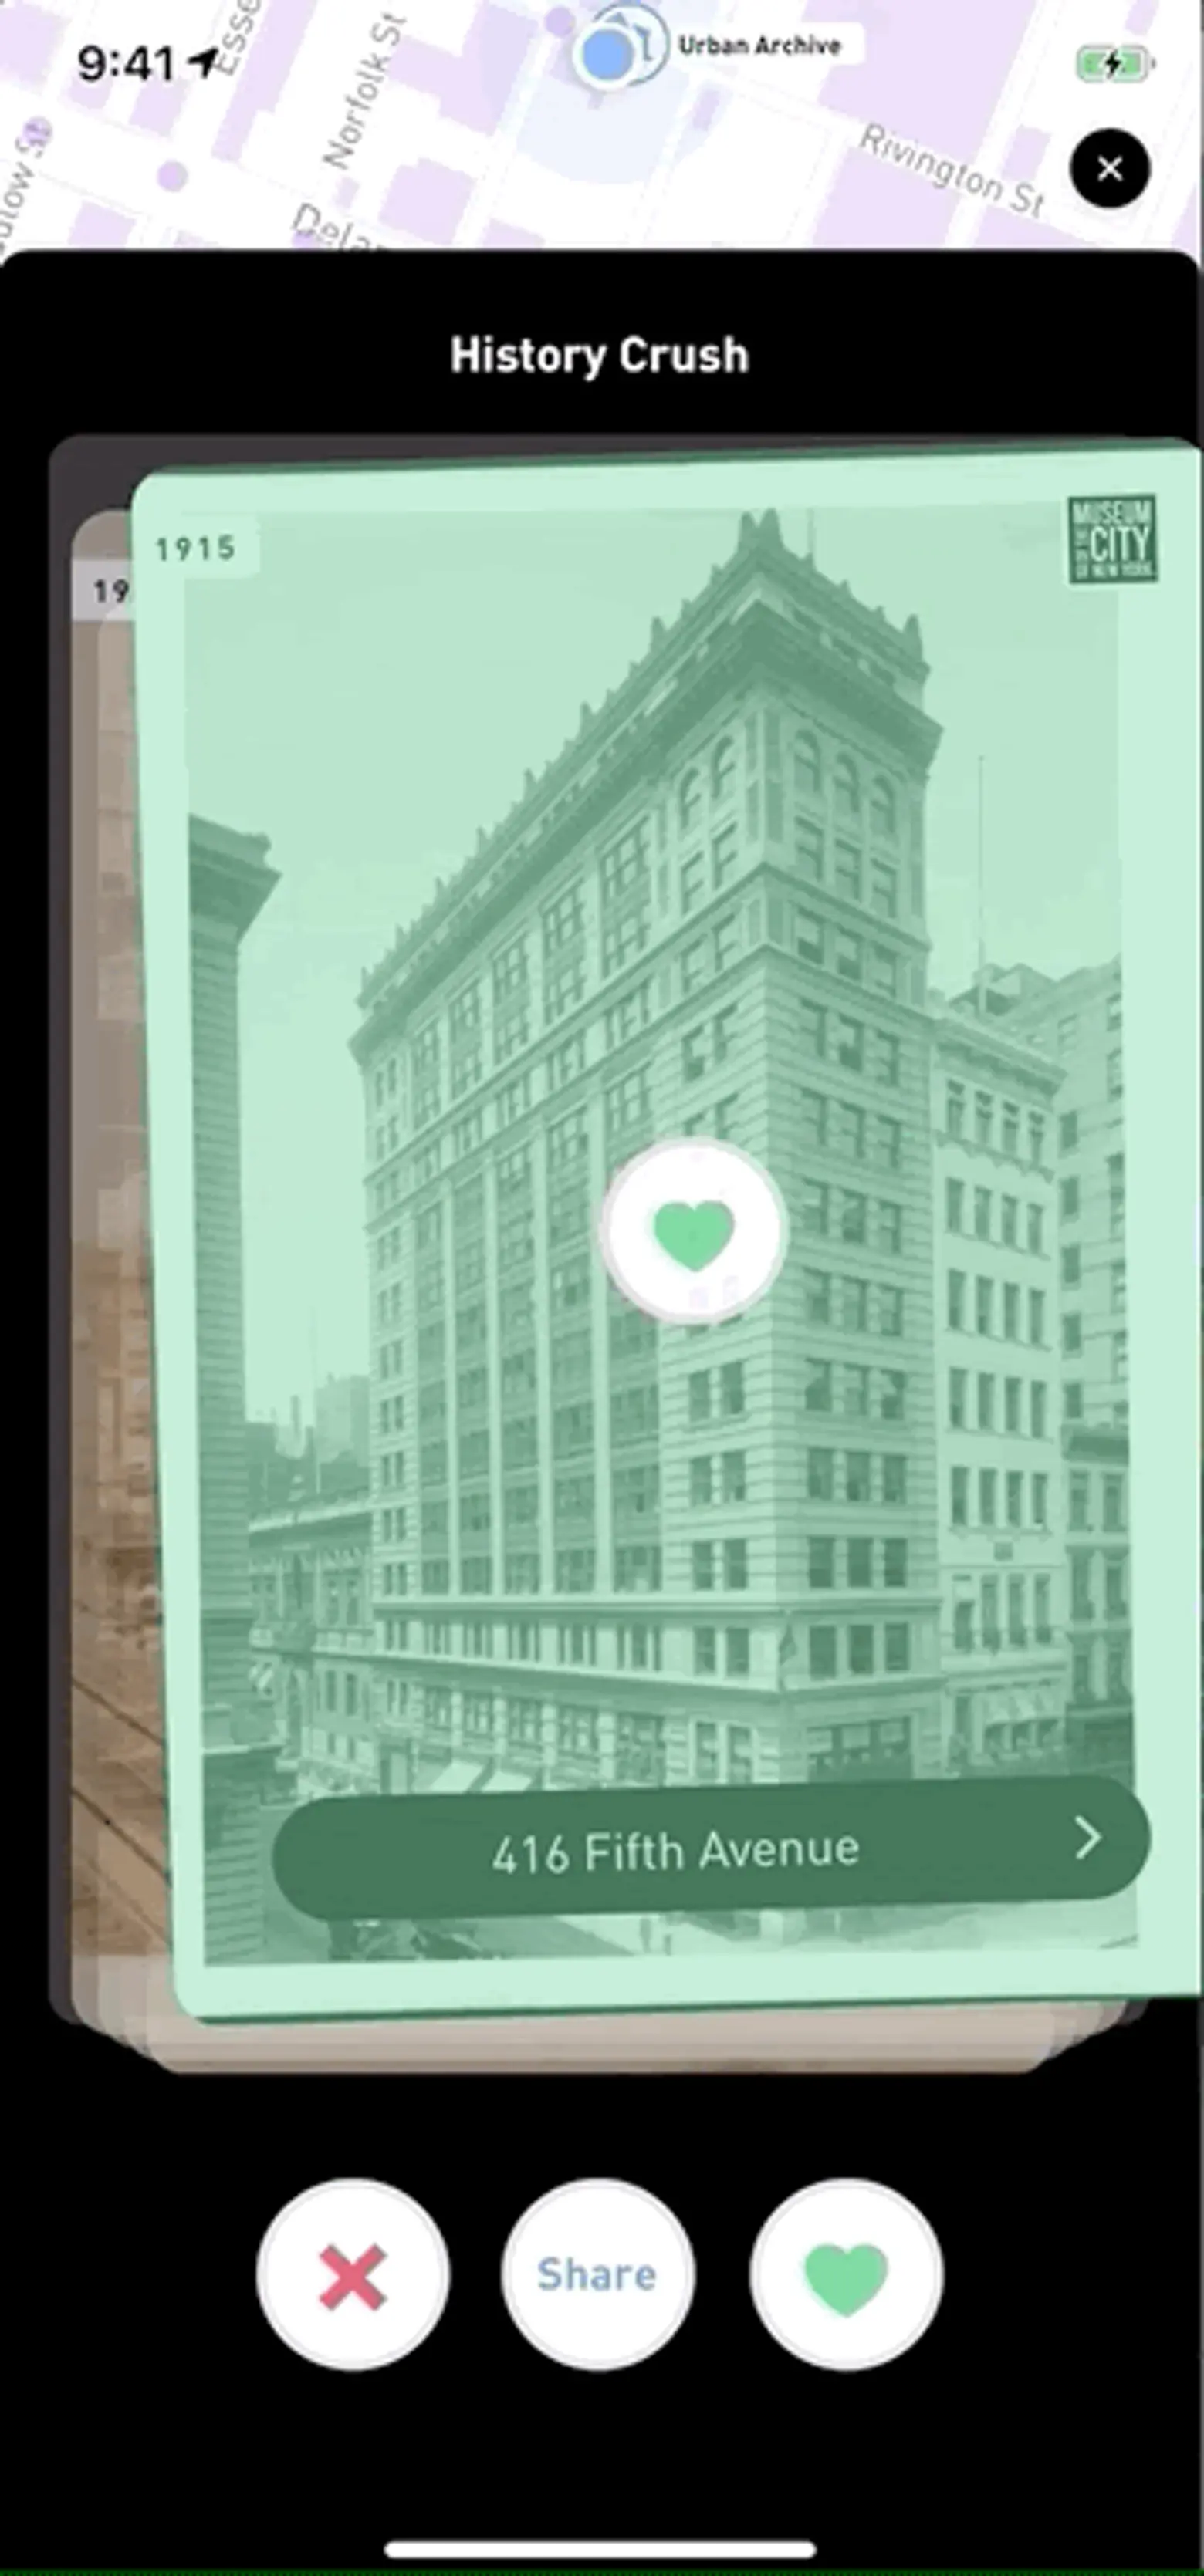 history crush, urban archive, maps, nyc history, apps